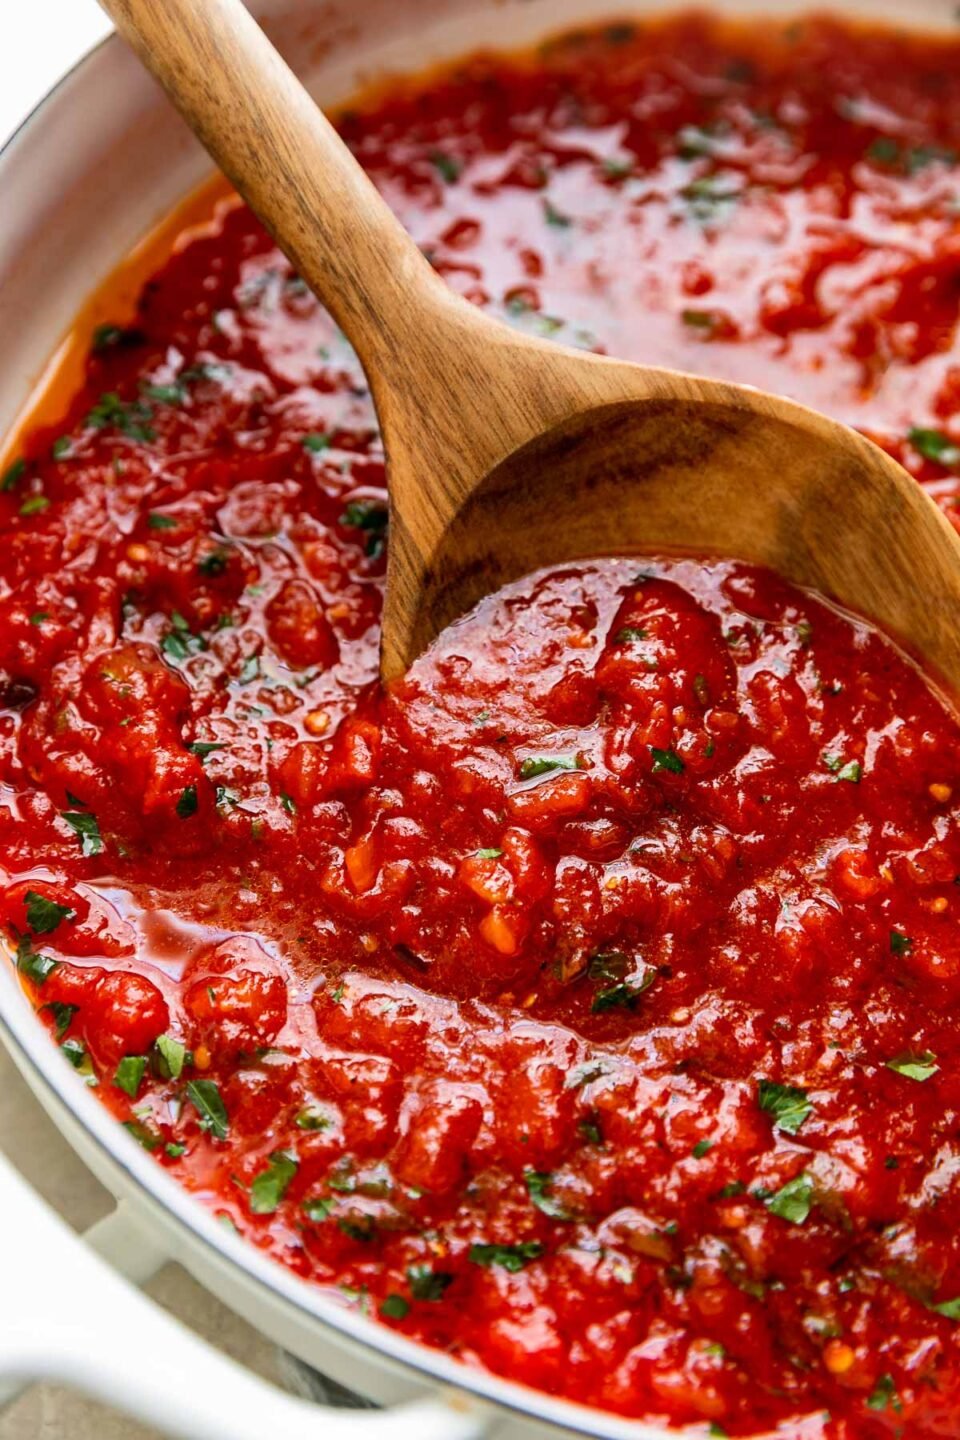 A side angle shot of finished San Marzano tomato sauce fills a large white double-handled skillet. The quick tomato sauce is garnished with chopped basil and the skillet sits atop a creamy white textured surface. A wooden spoon rests inside of the skillet for serving.